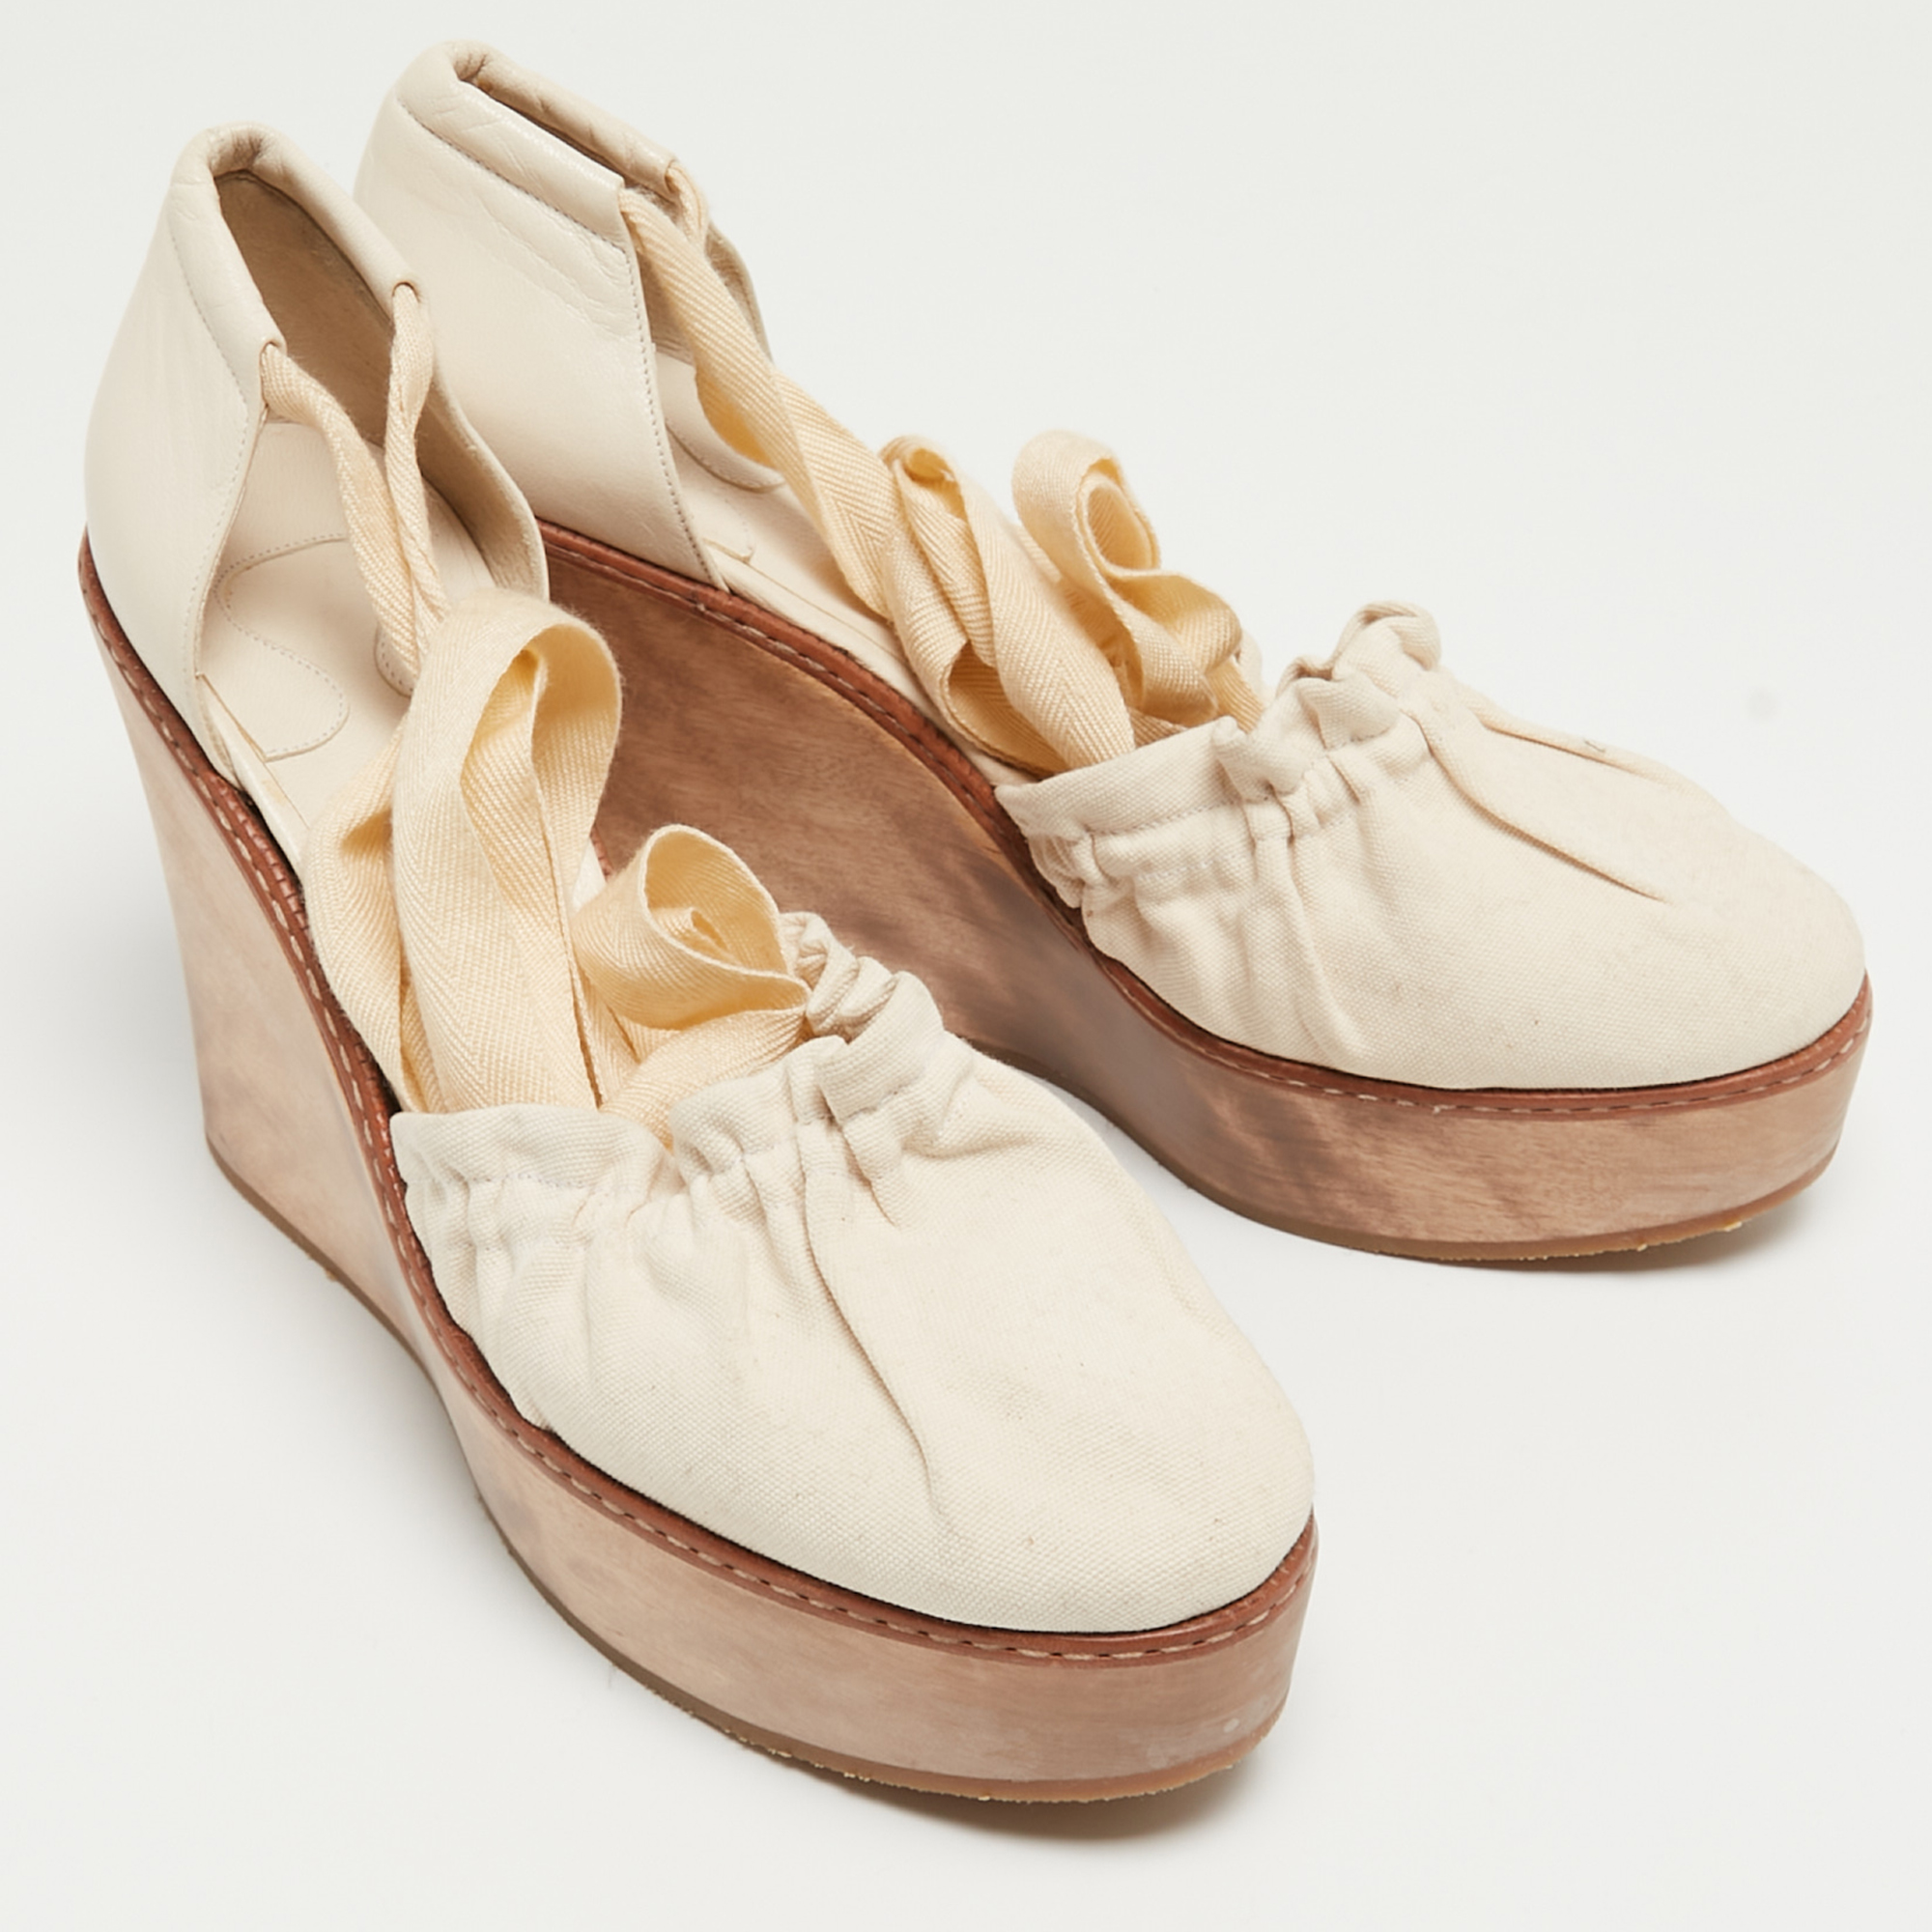 Chloe Cream Leather And Canvas Wedge Platform Ankle Tie Pumps Size 41